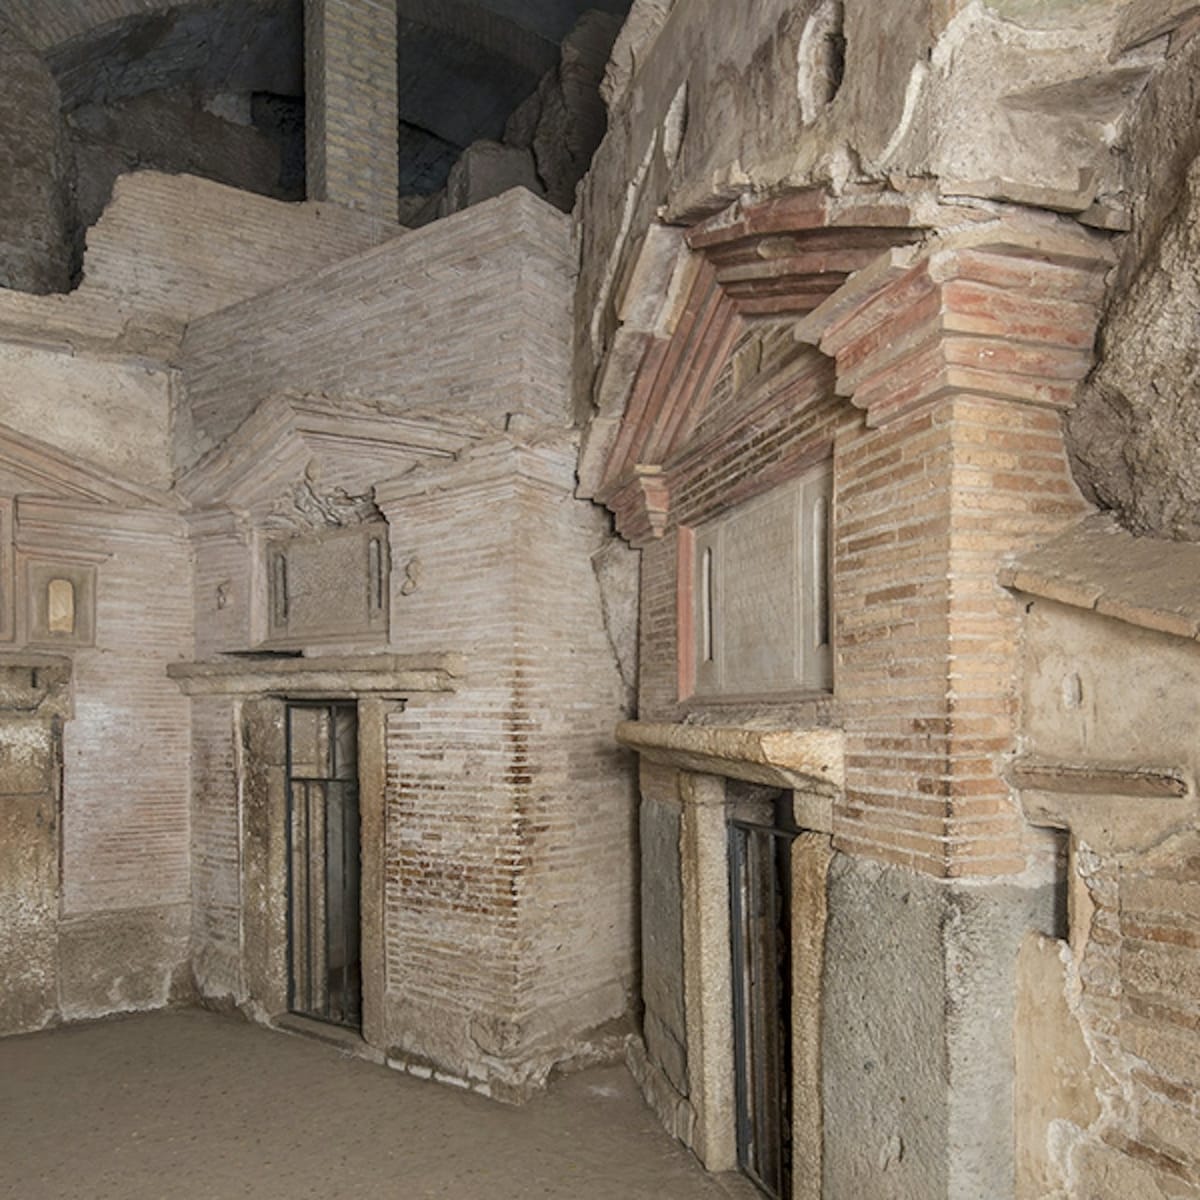 catacombs-of-san-sebastiano-rome-entry-ticket-guided-tour_1